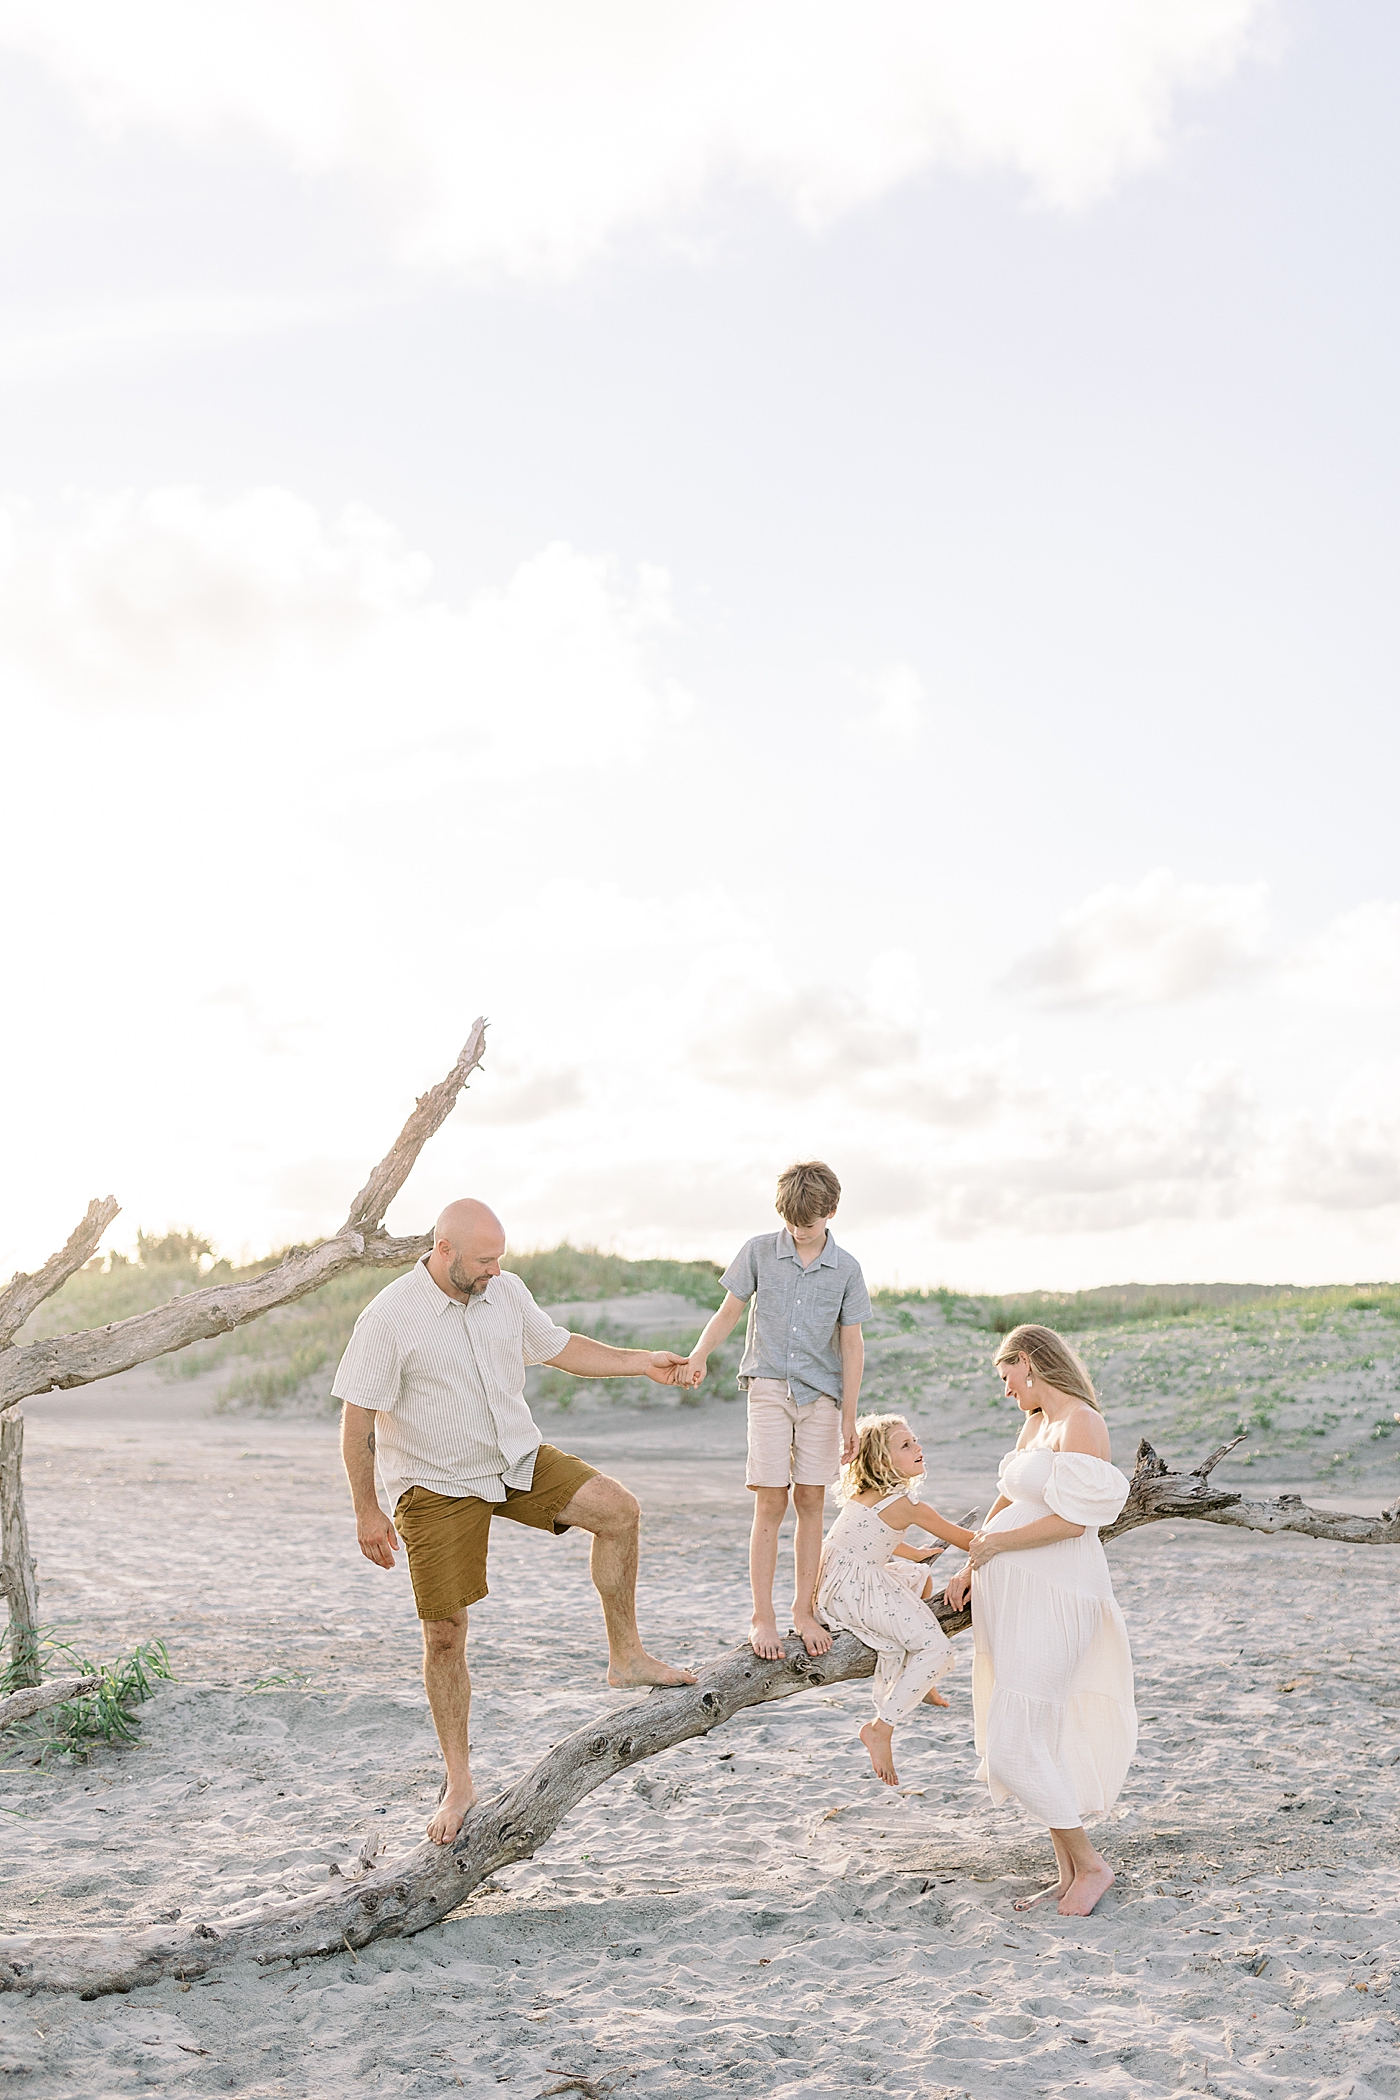 Family of four sitting on a tree during their Maternity Session at Folly Beach | Image by Caitlyn Motycka